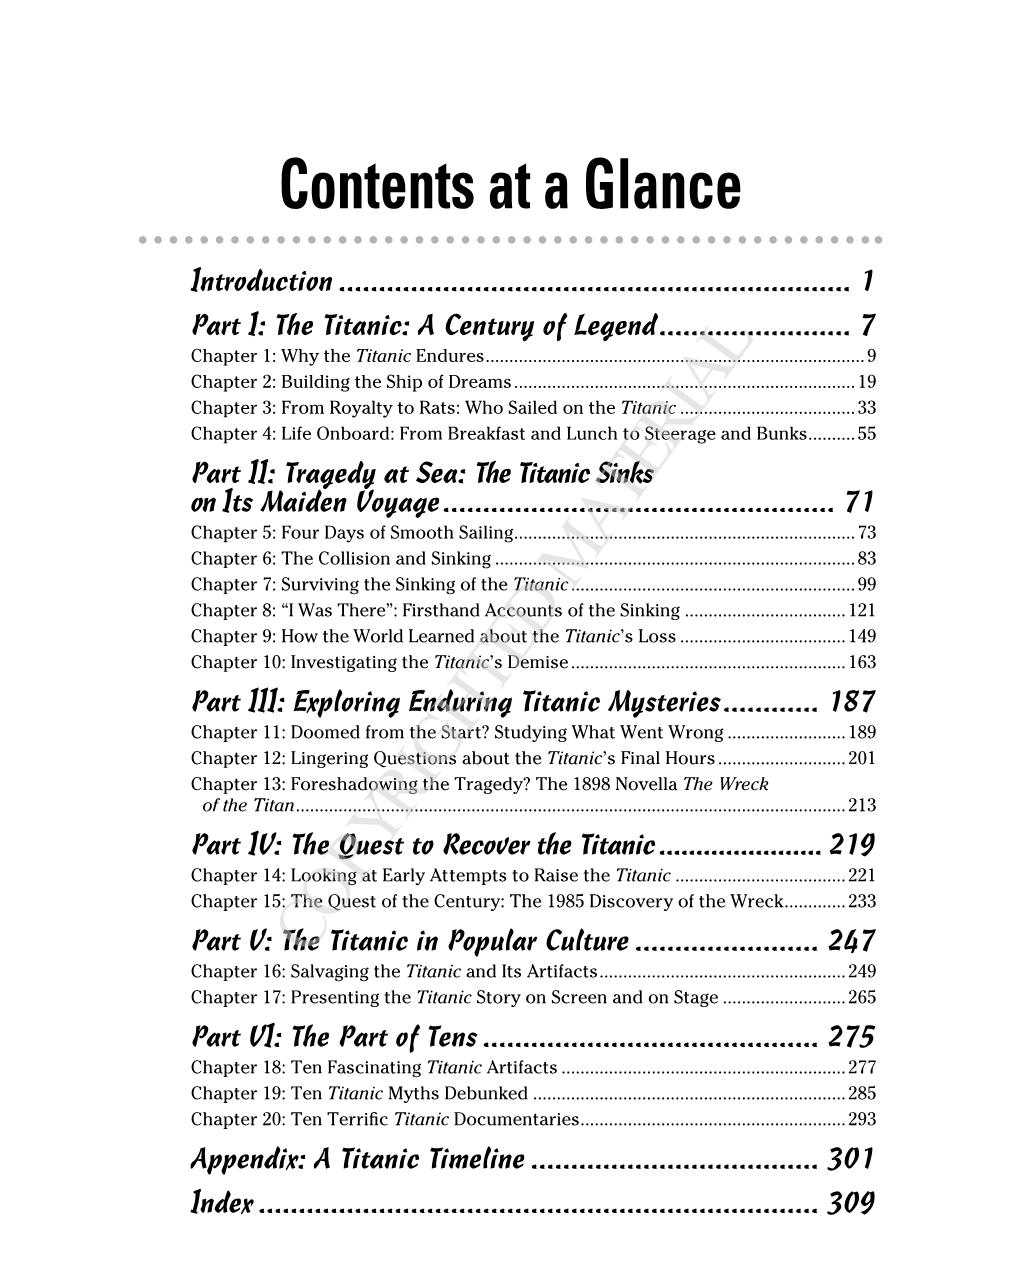 Contents at a Glance